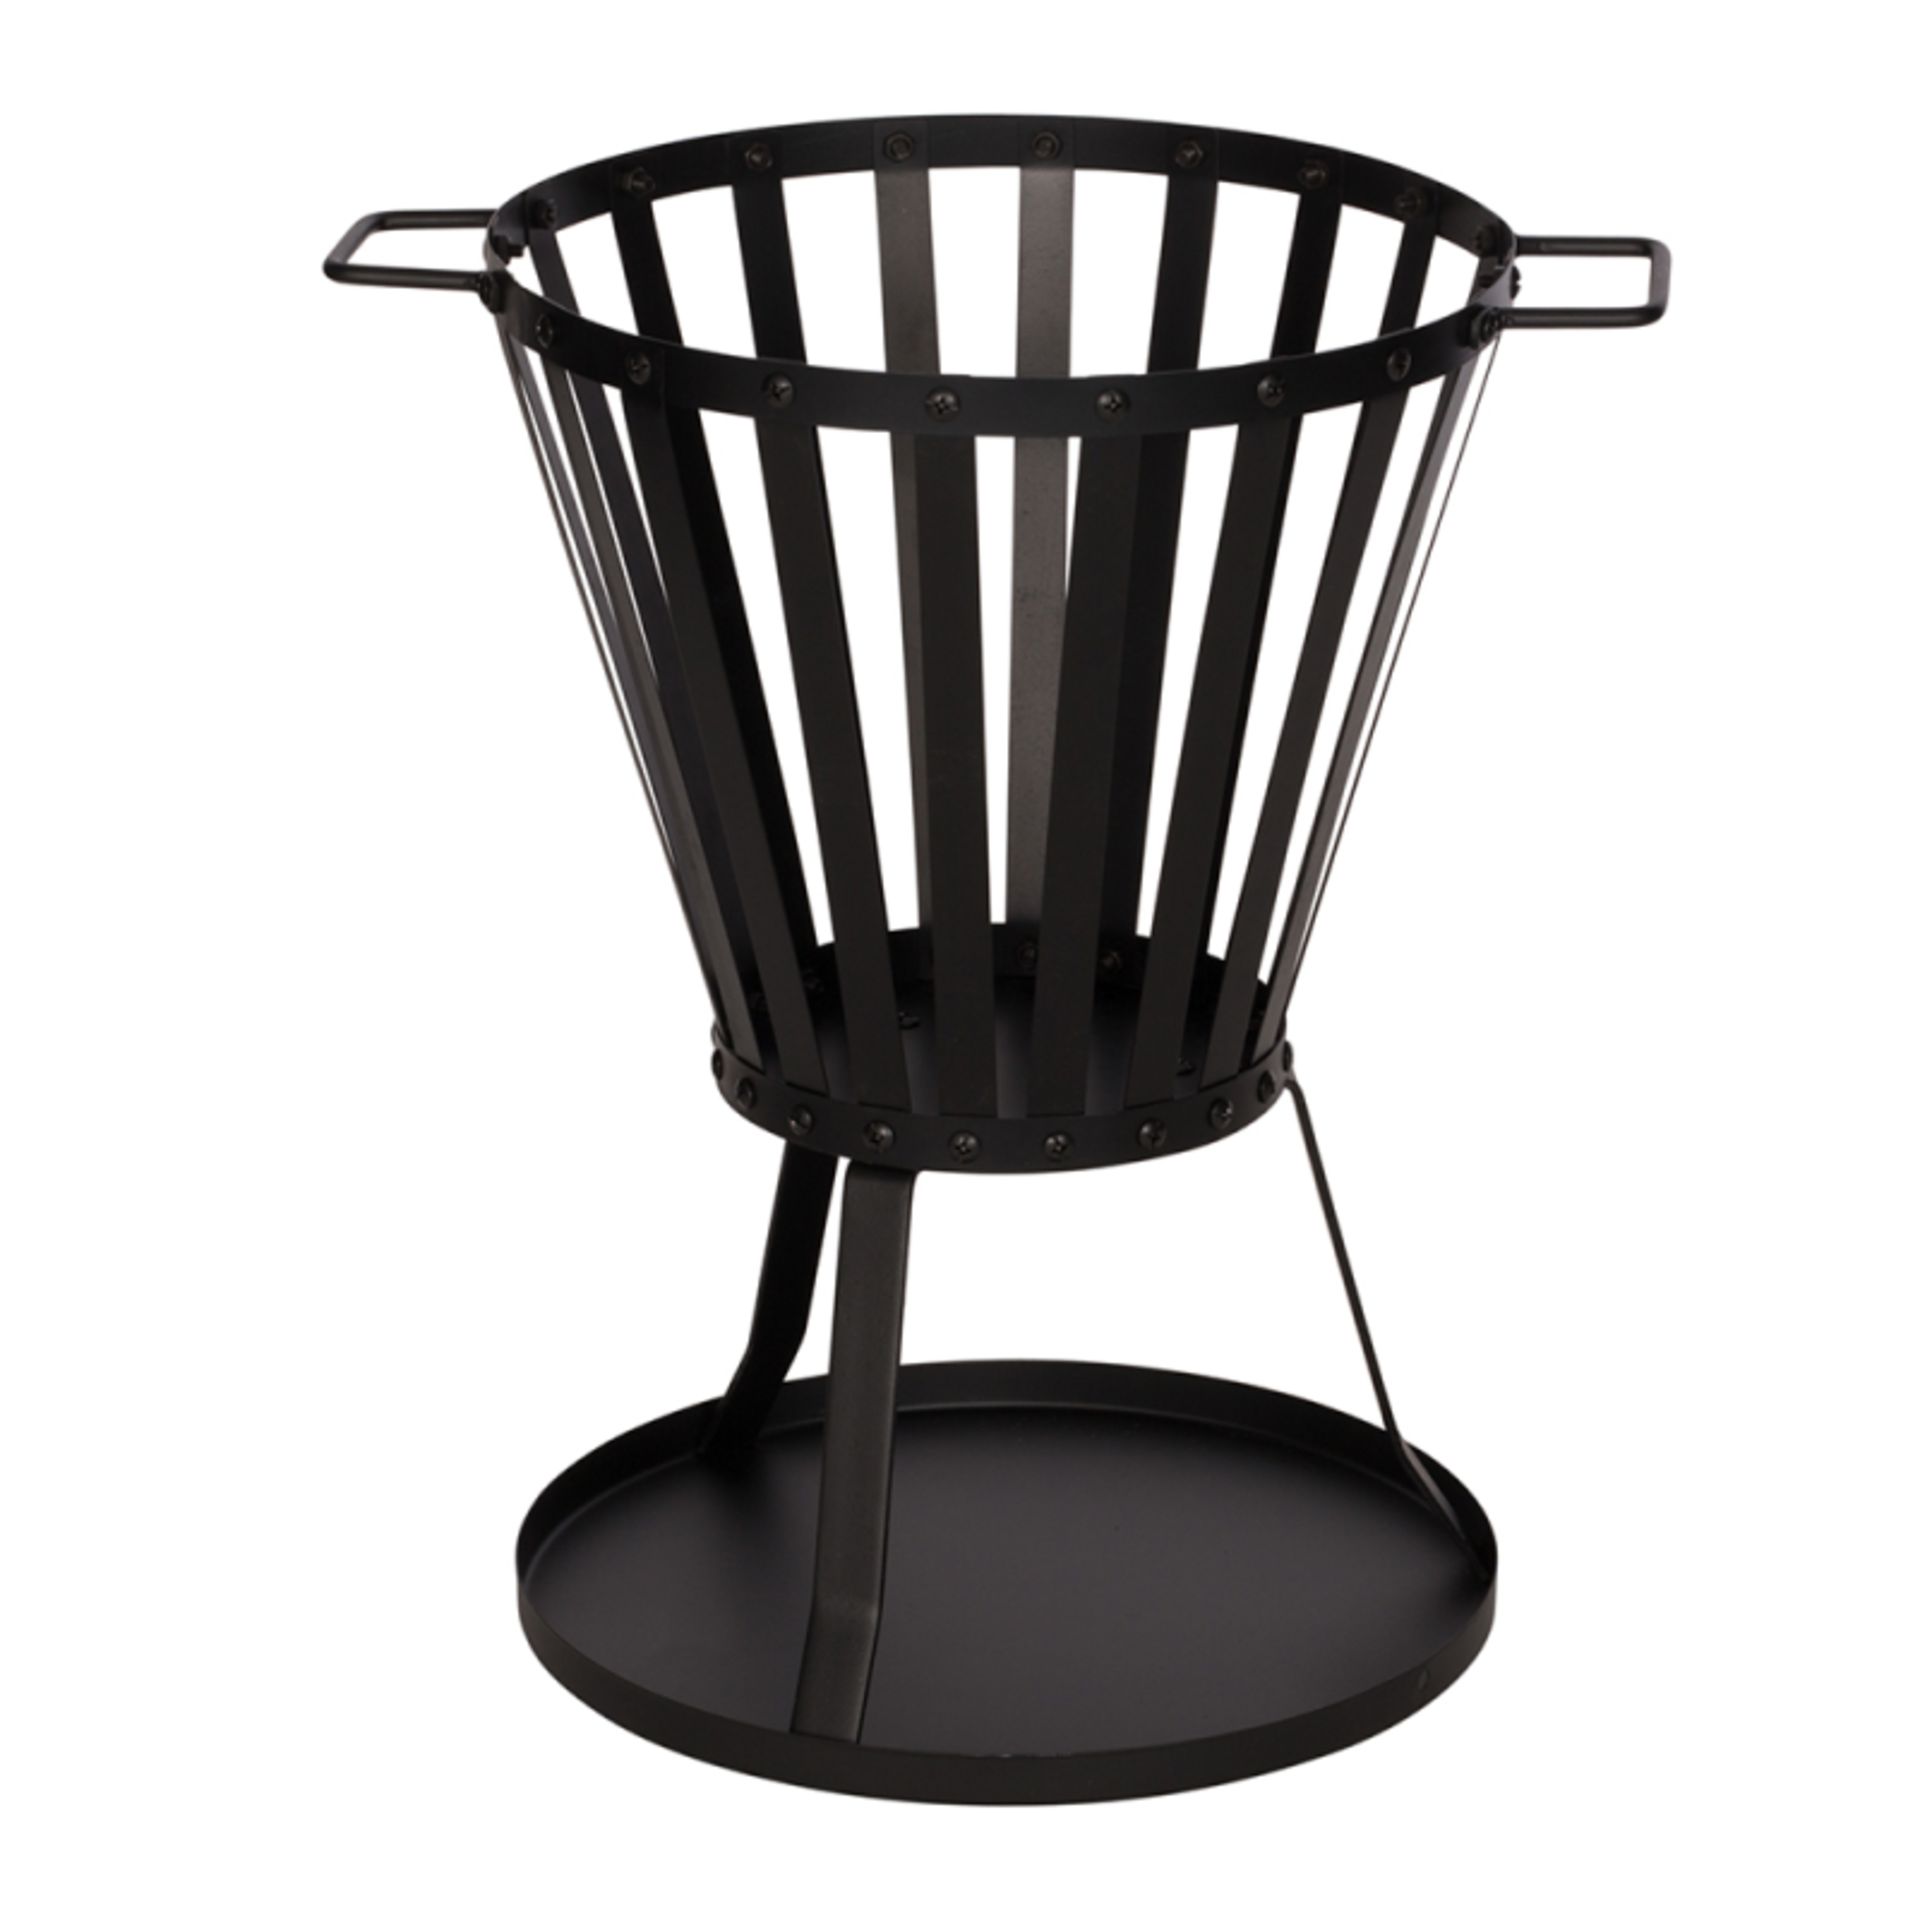 V Brand New Fire Basket - Made From Black Powder Coated Steel - H50cm x D36cm